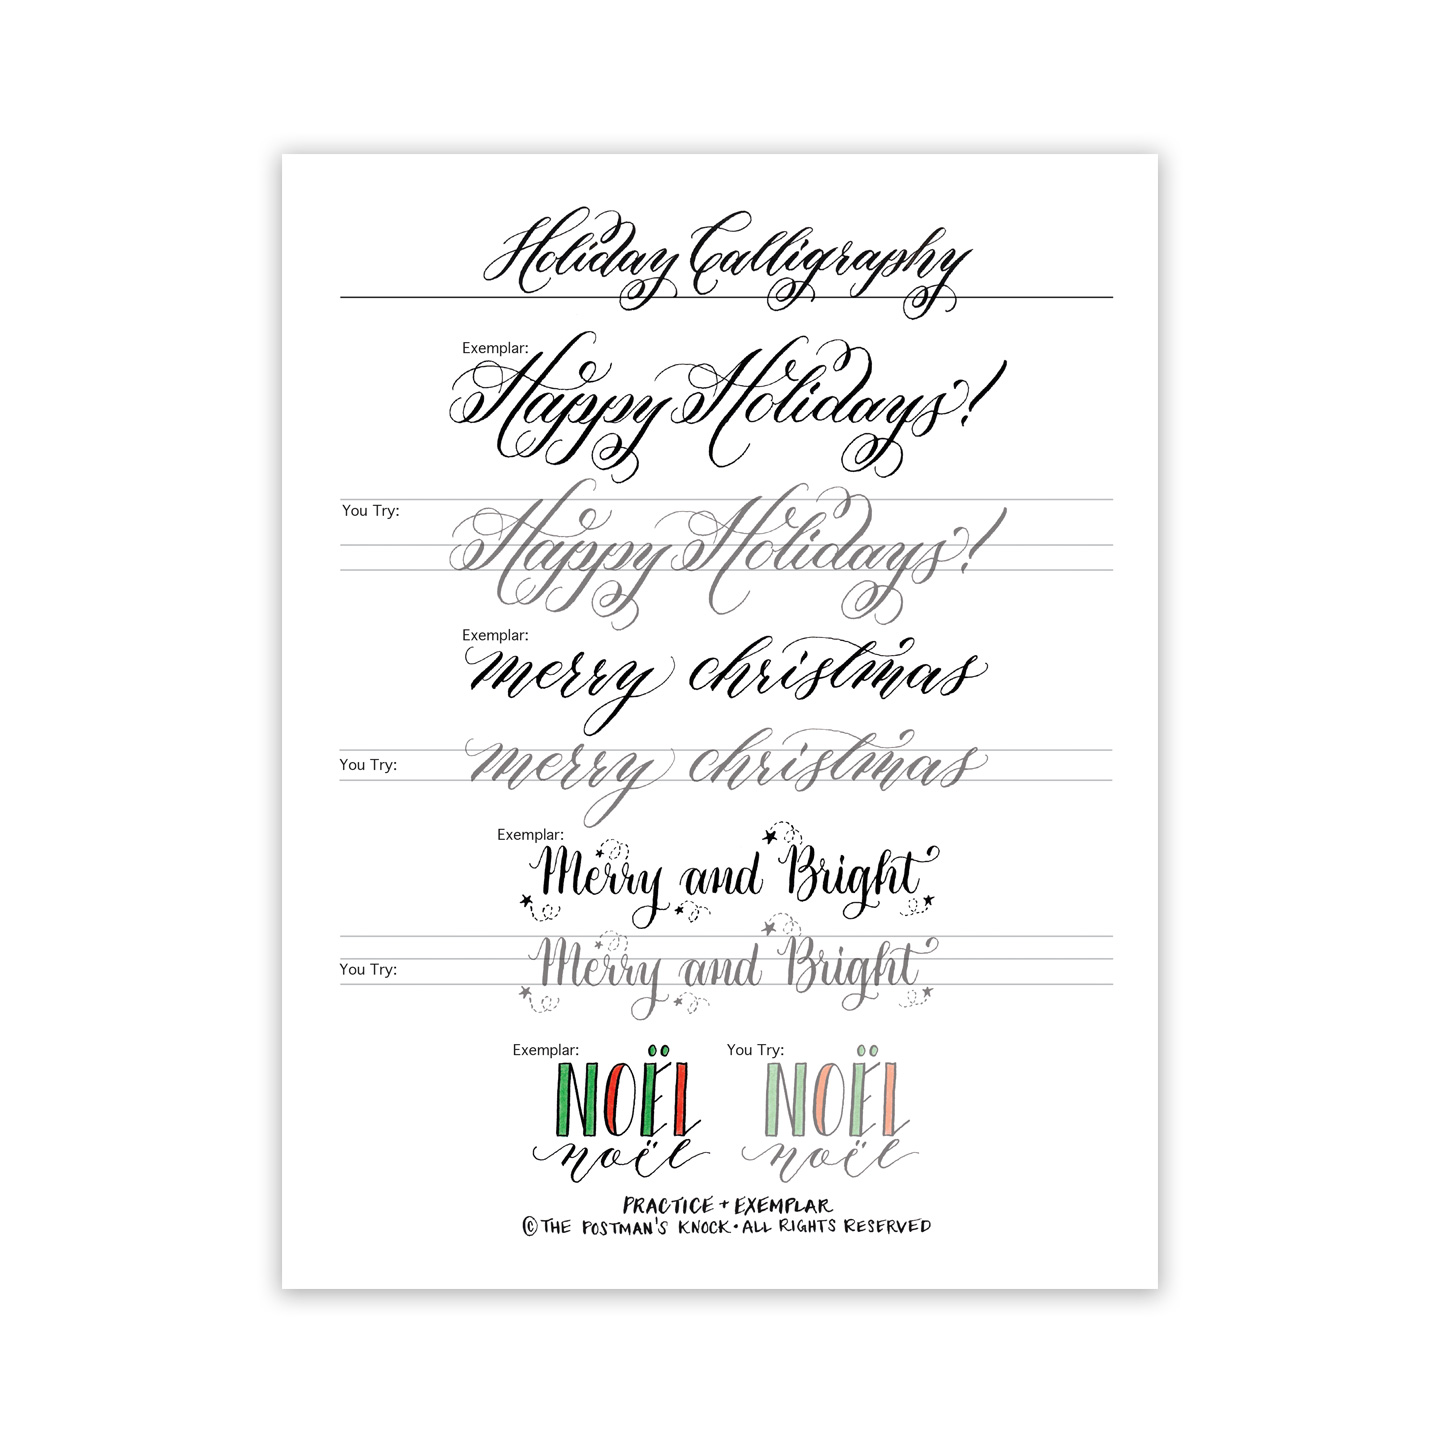 Free Holiday Calligraphy Exemplar The Postman S Knock